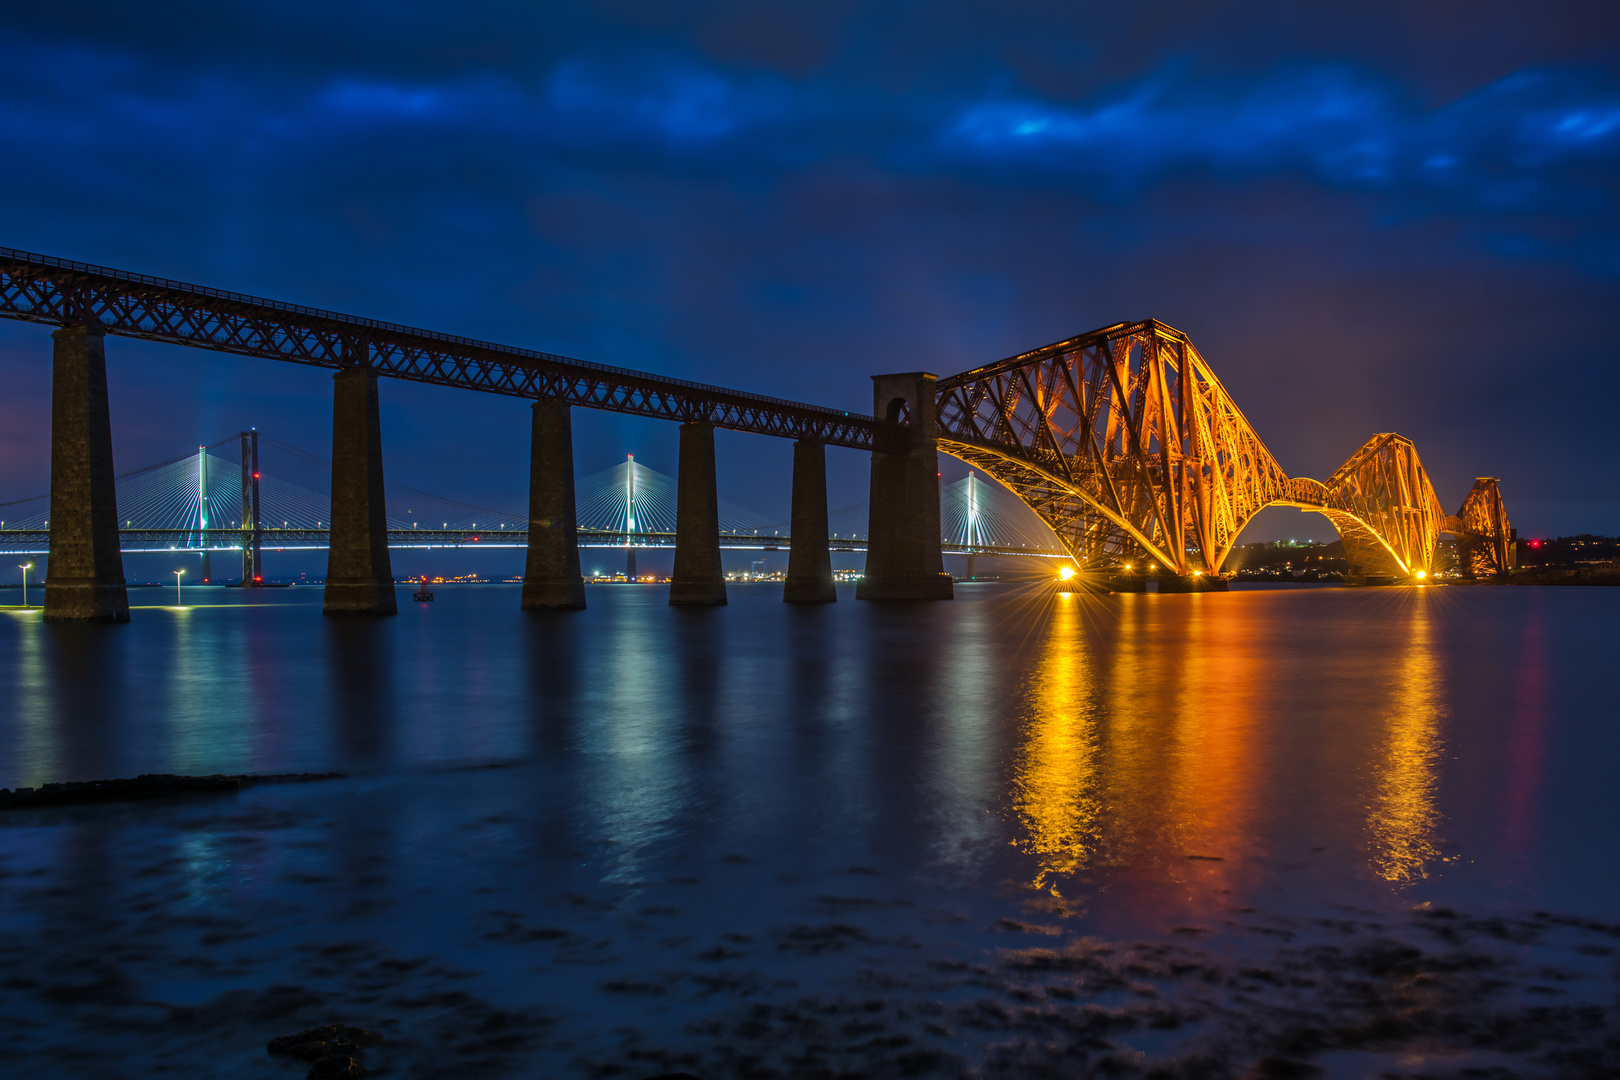 Firth of Forth - Blue Hour